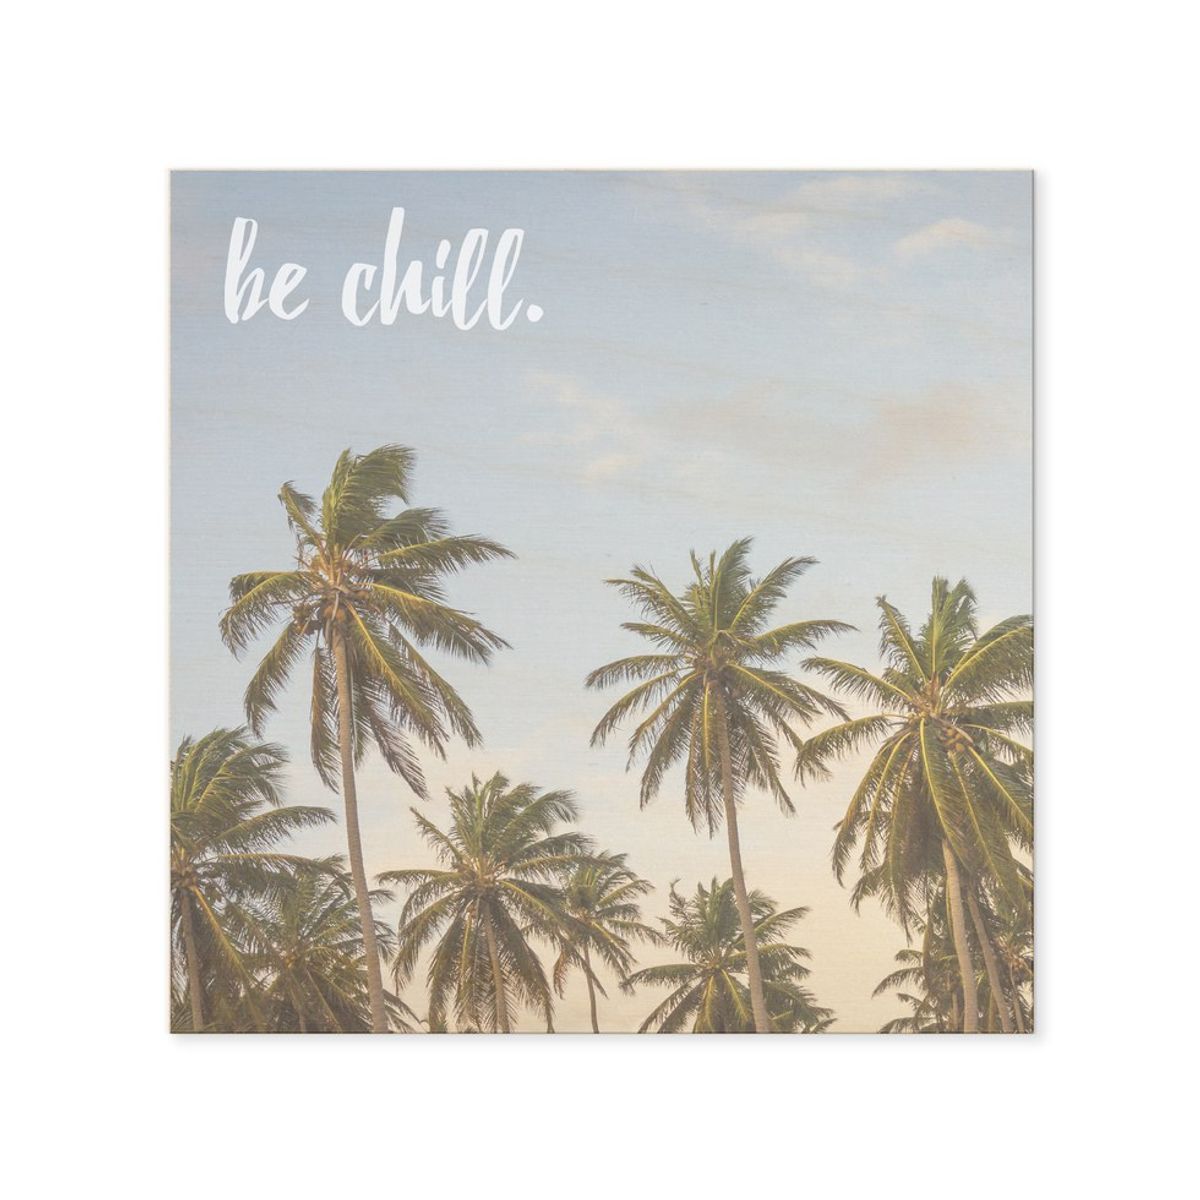 Just "Be Chill"